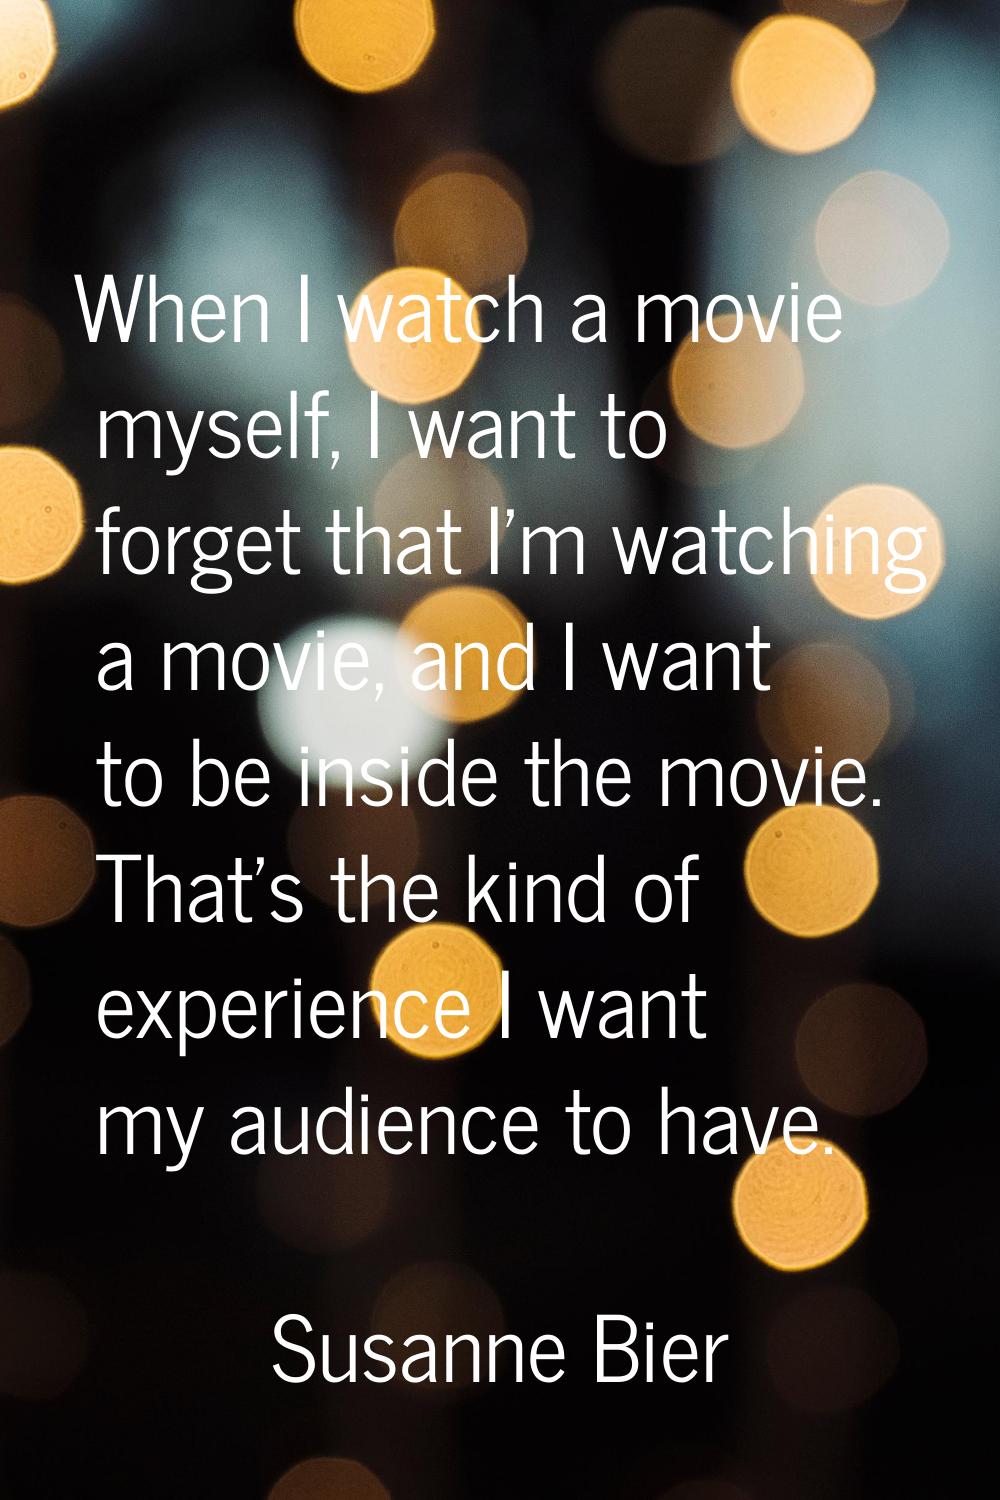 When I watch a movie myself, I want to forget that I'm watching a movie, and I want to be inside th